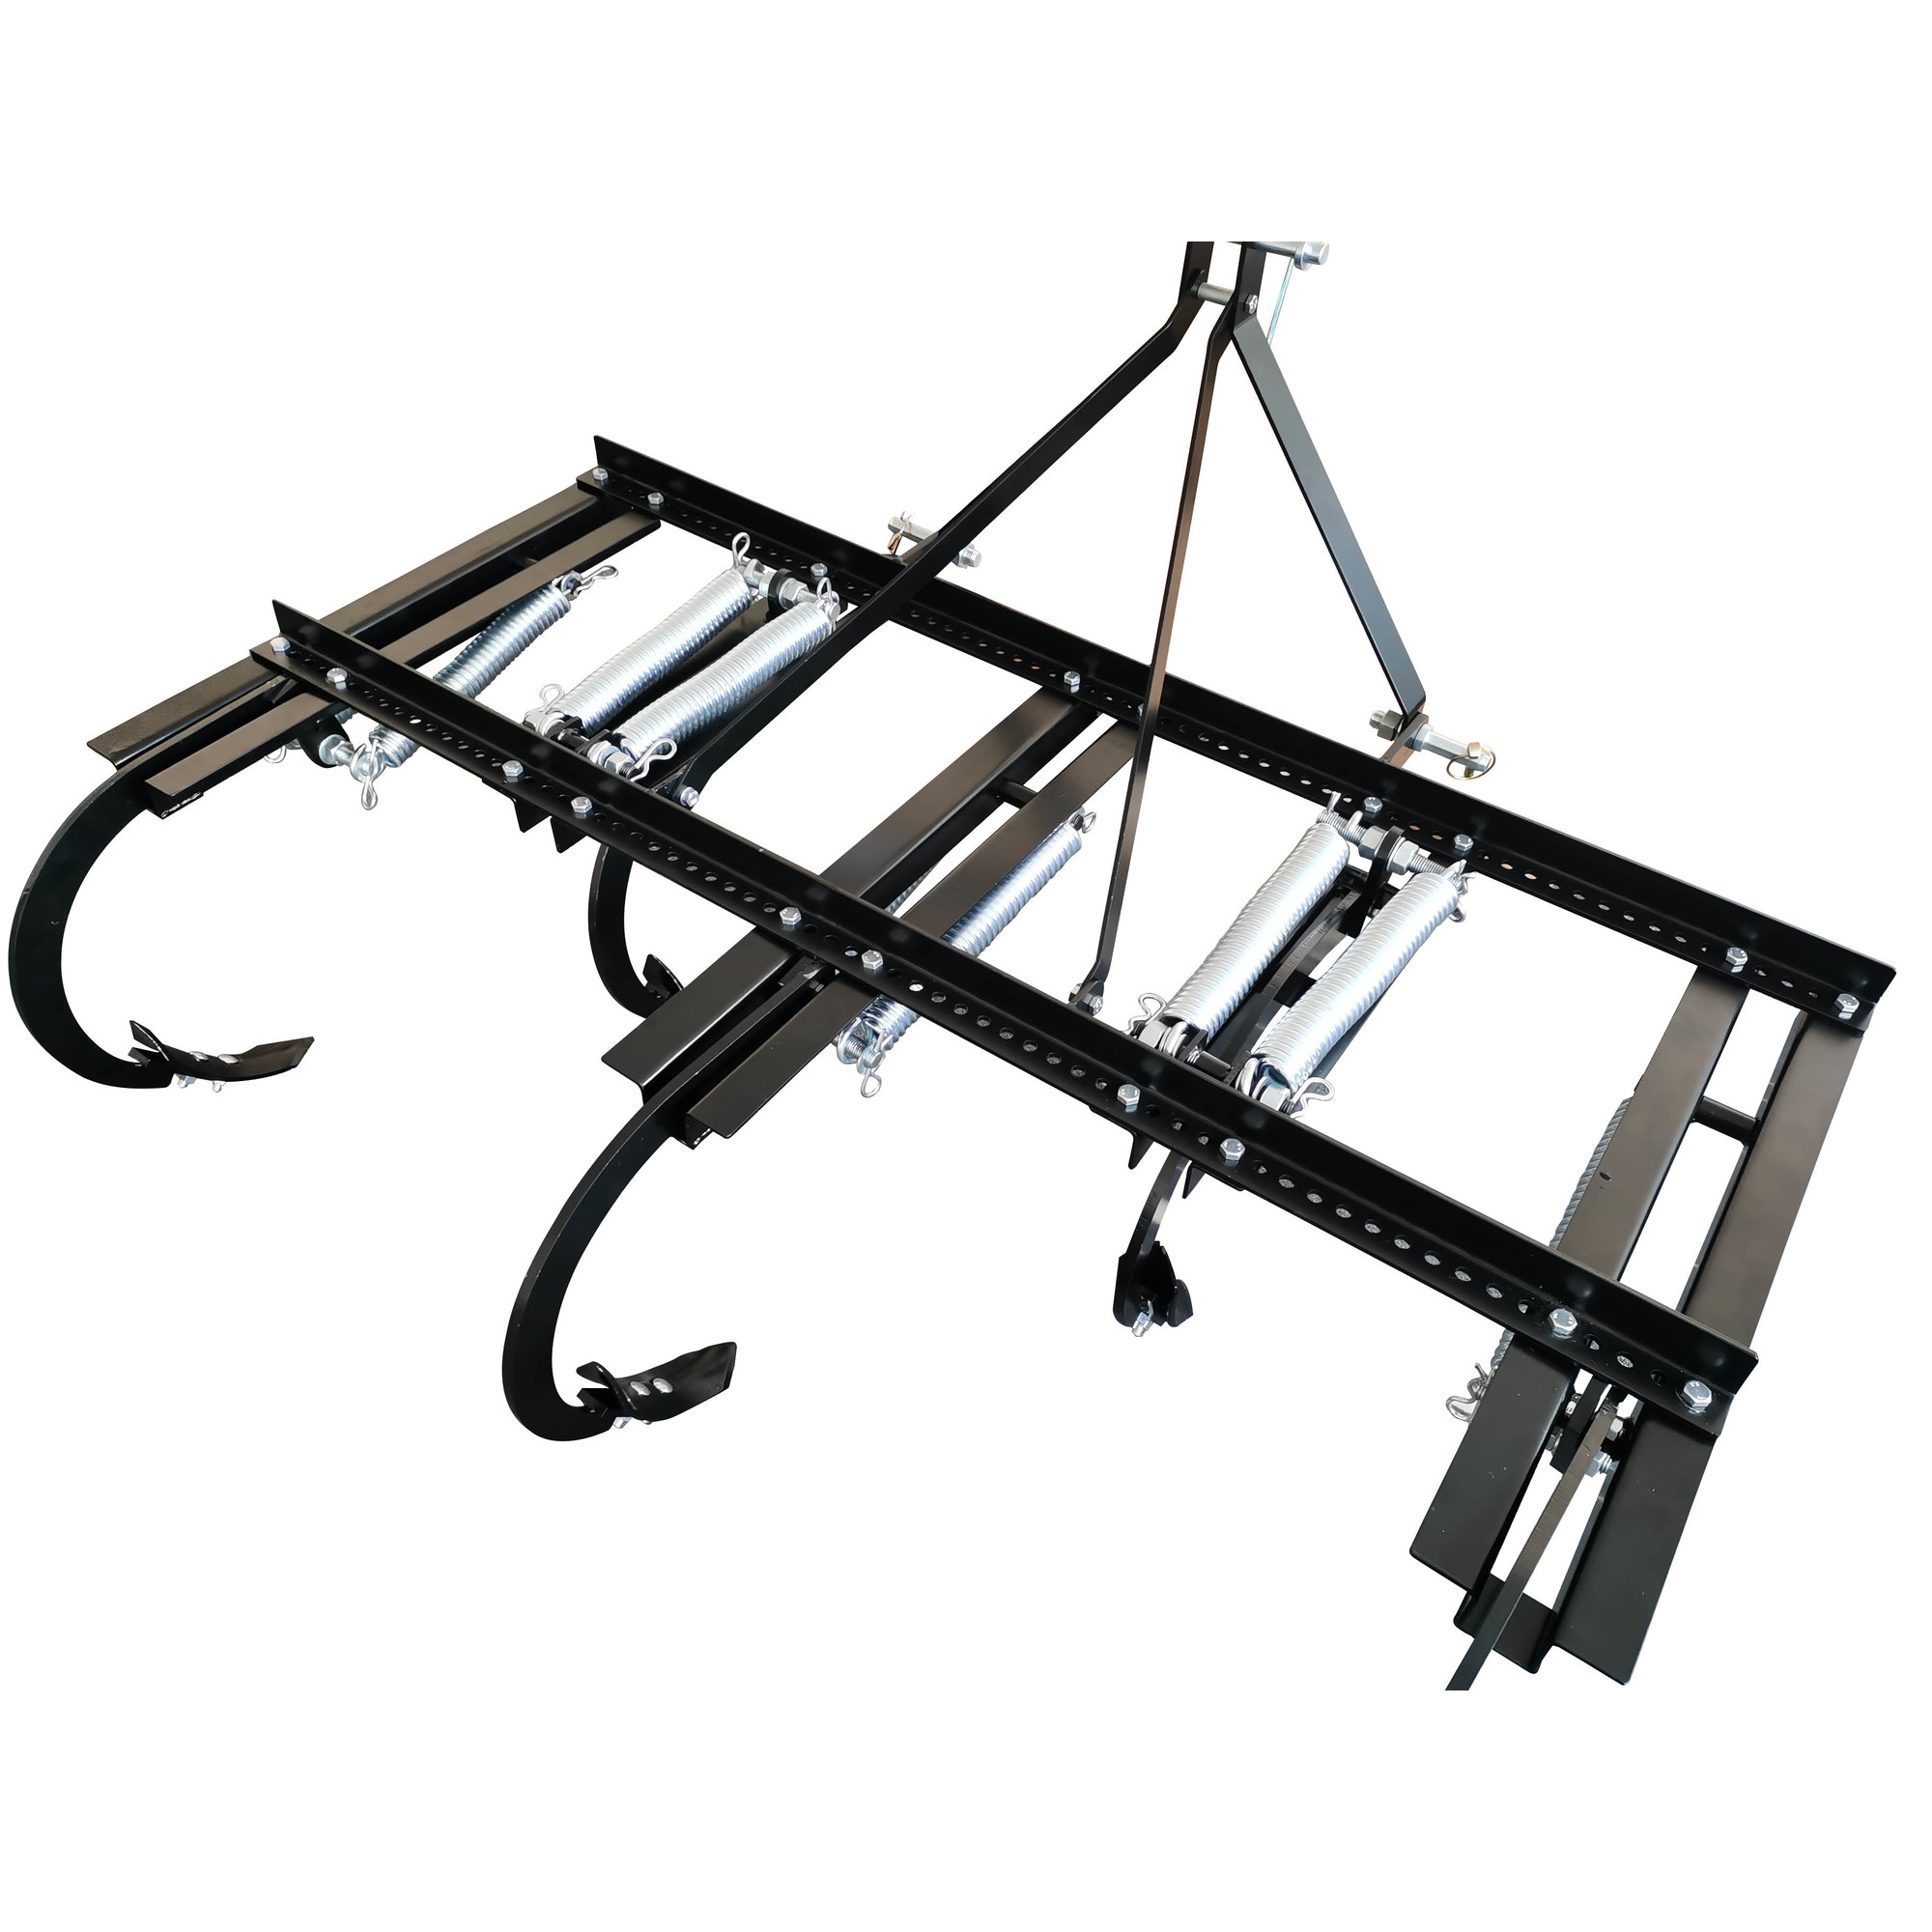 Field Tuff, 3 Point Chisel Plow, Working Width 65 in, Max. Depth 10 in, Category Category 1 Model FTF-5SCP3PT